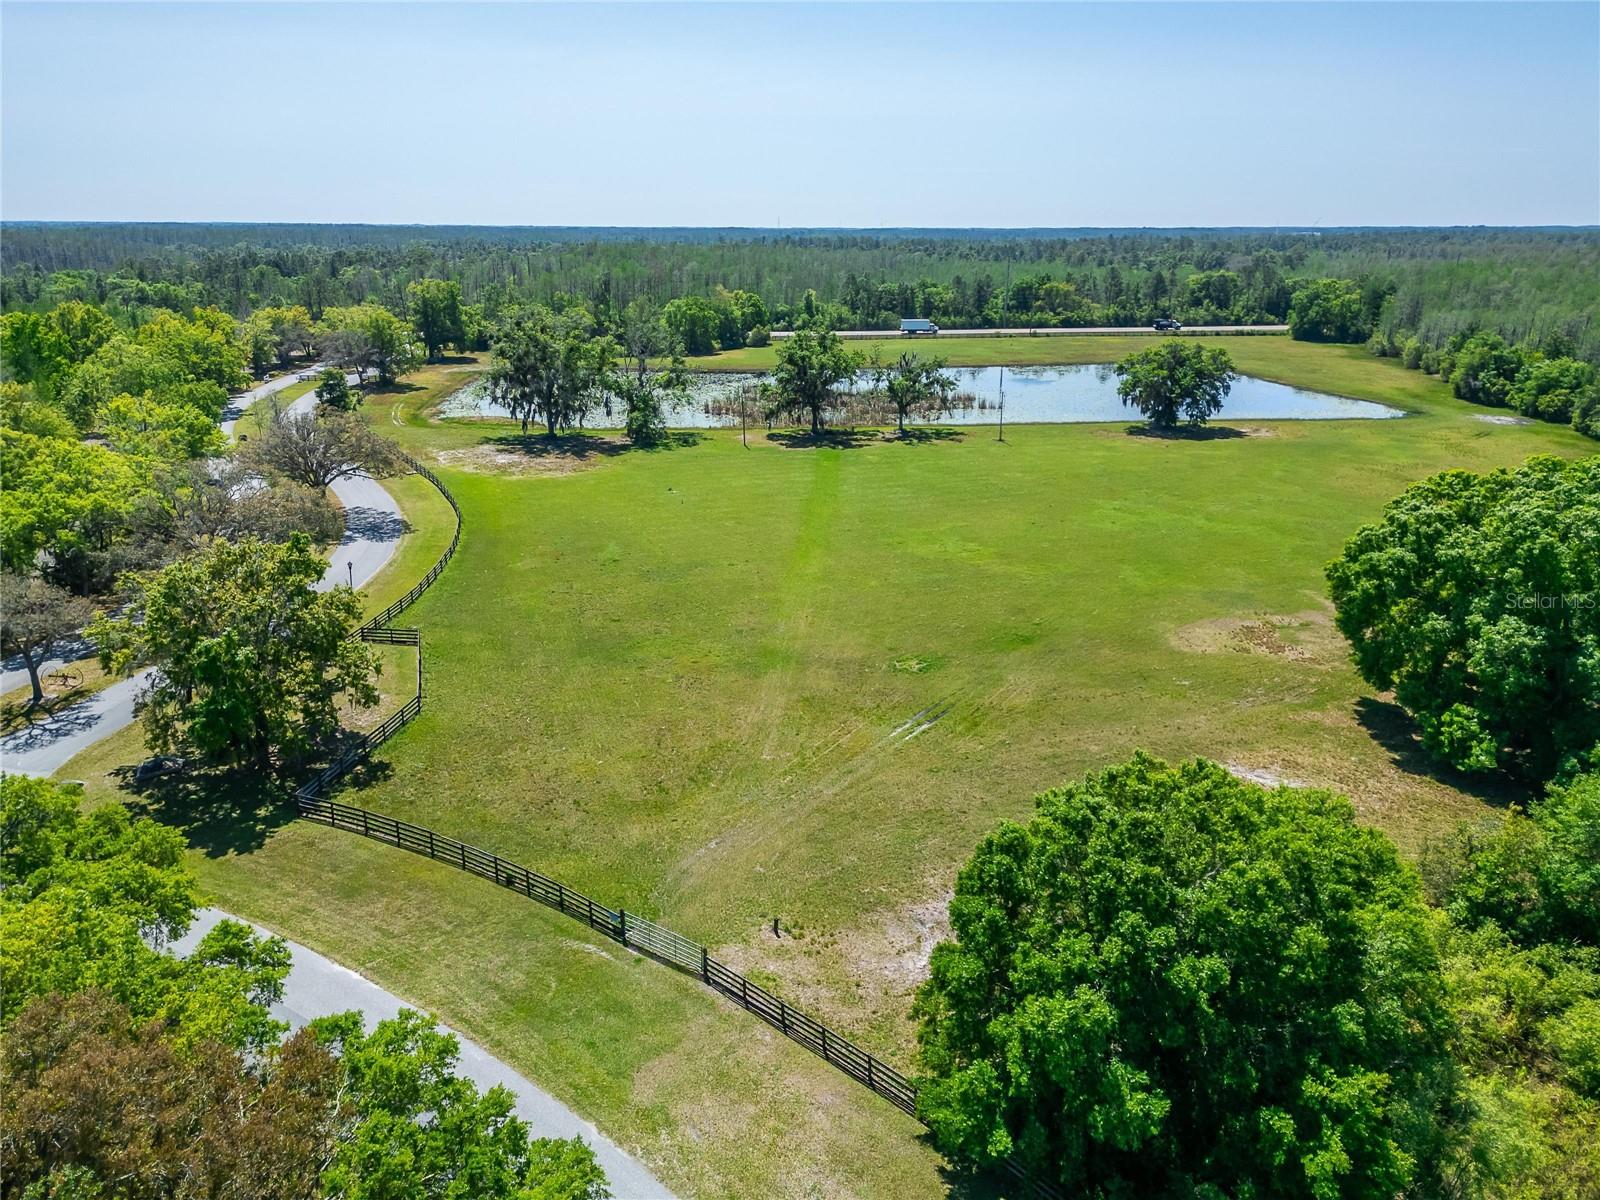 Bring Your Horses.  Community has 25 Acres and 2 fishing ponds